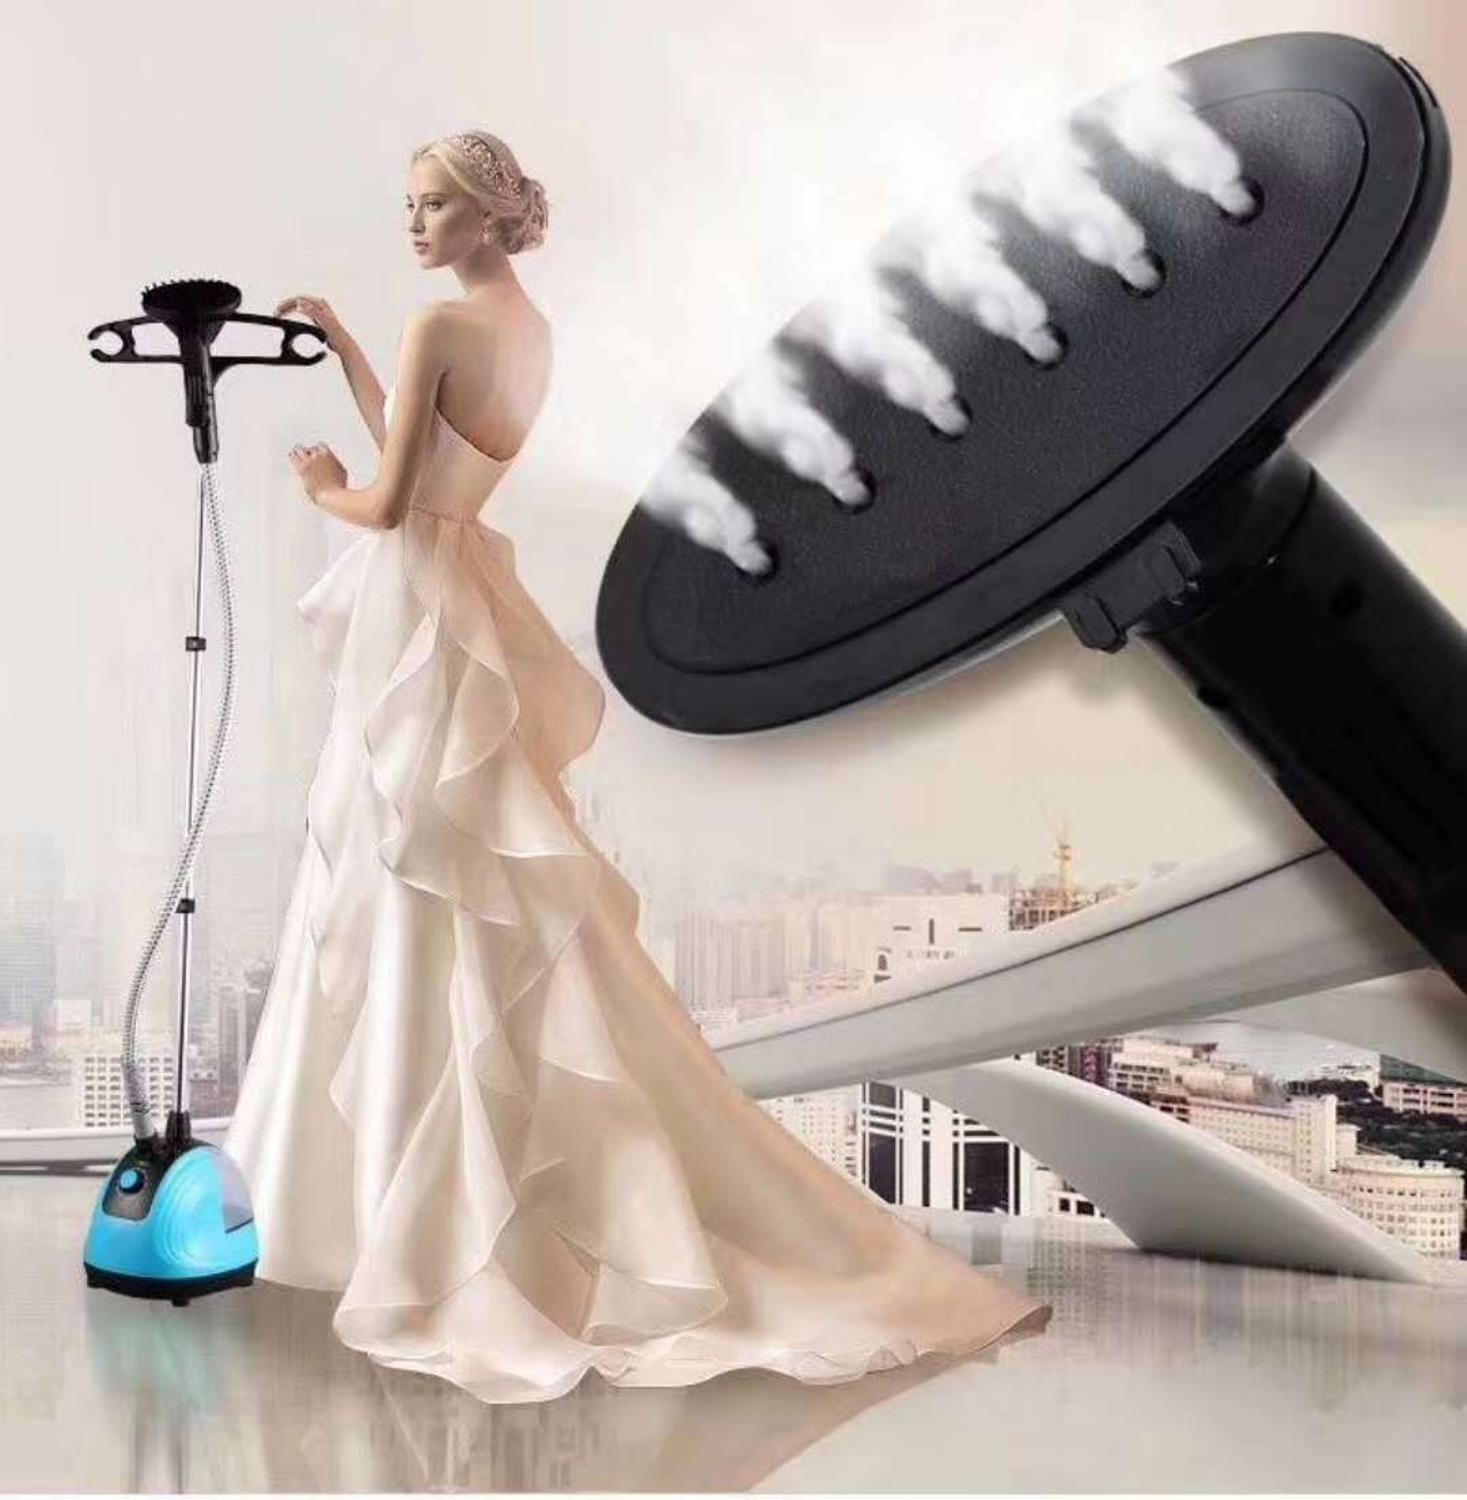 220V 1800W Portable Handheld Garment Steamer Adjustable Electric Irons Clothes Ironer Steamer Garment Hanging Ironing Machine